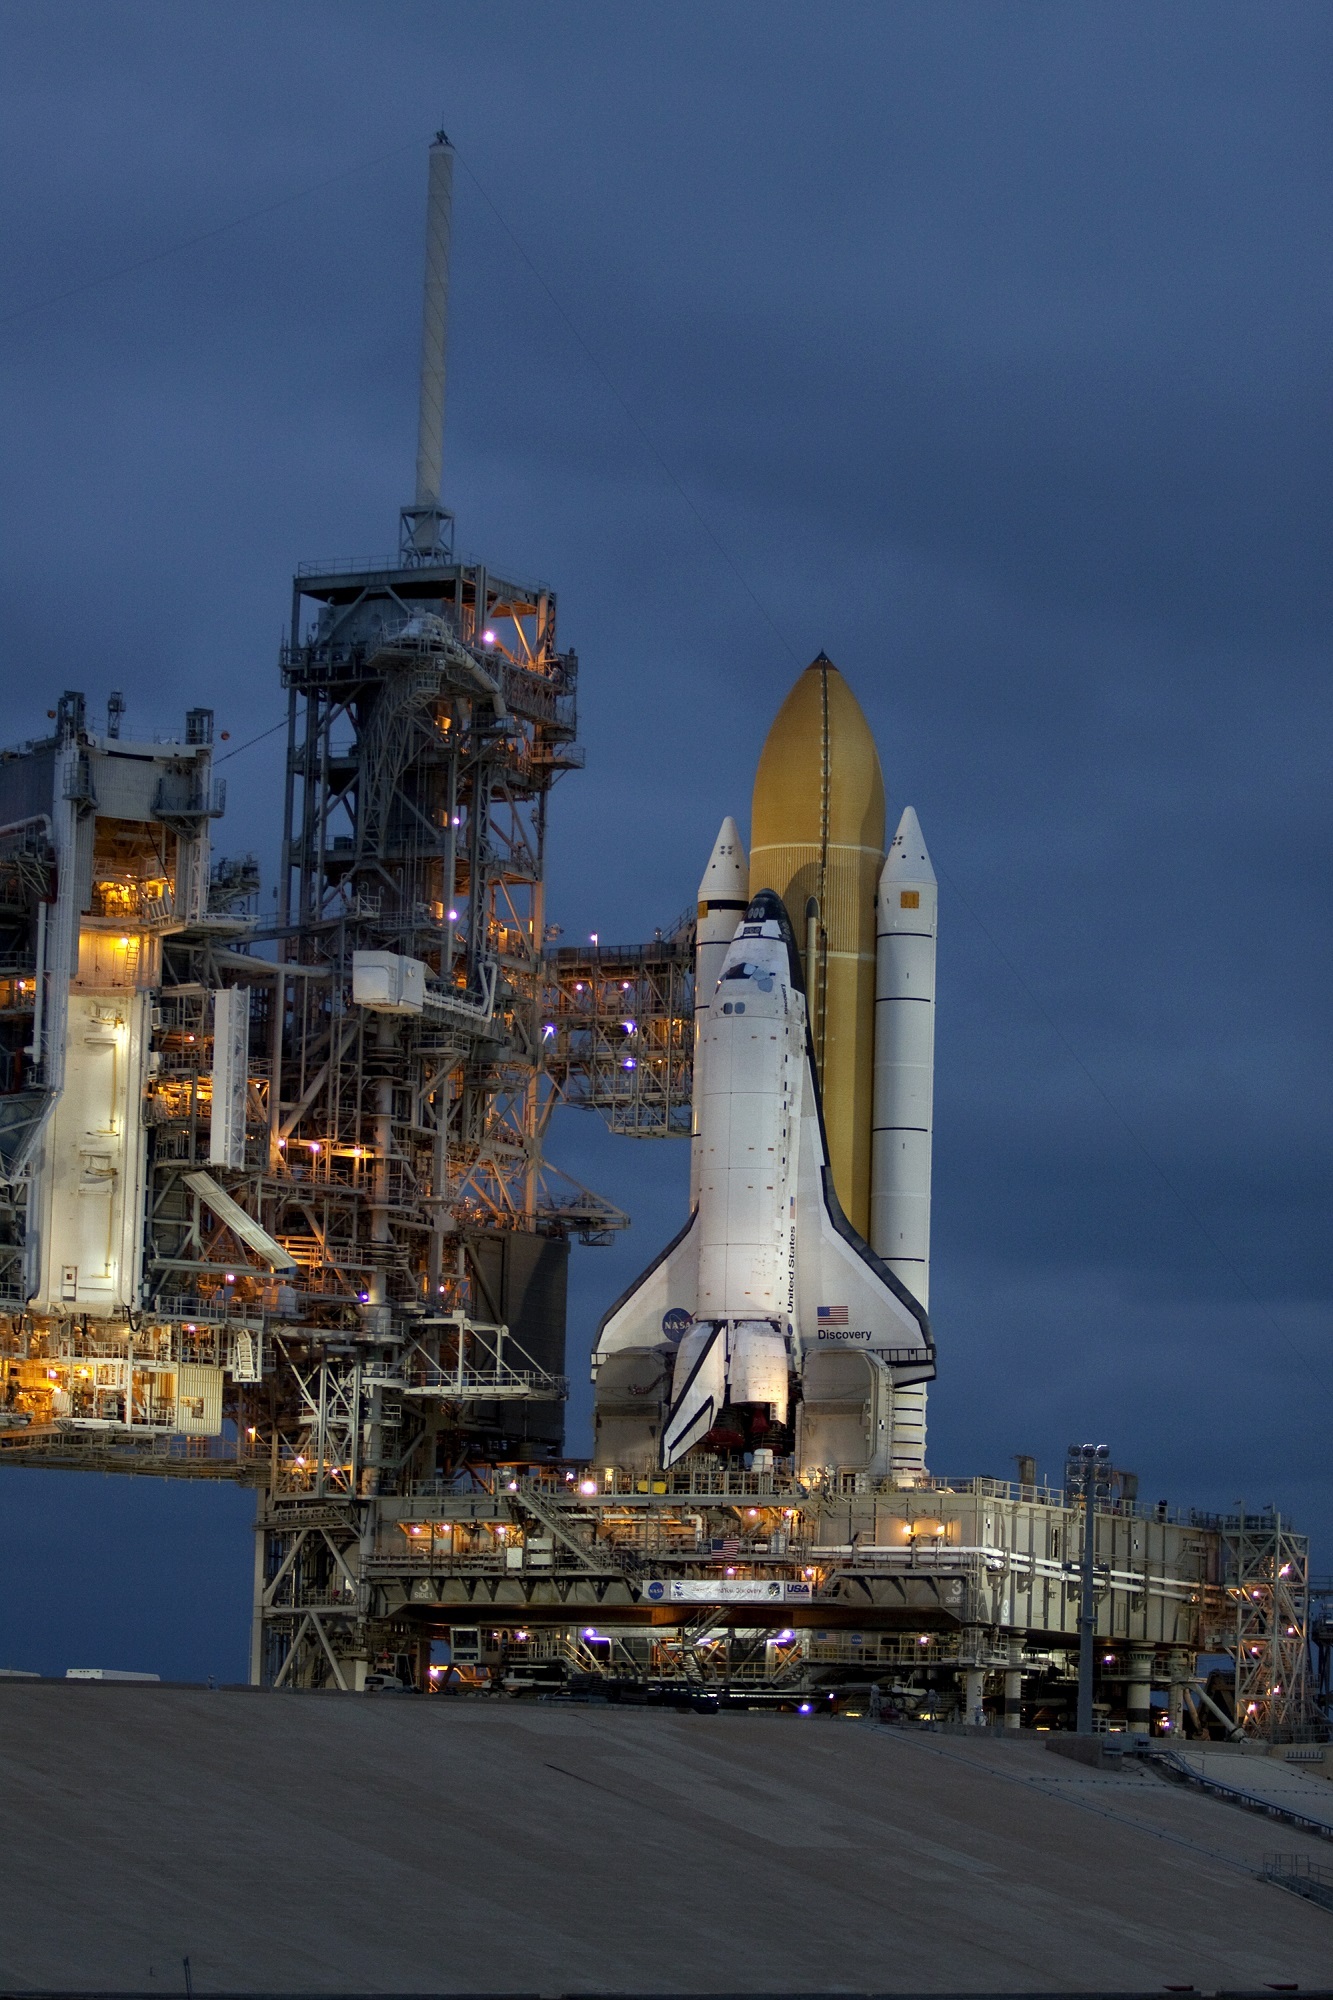 Discovery Space Shuttle, Discovery, Mission, Nasa, Shuttle, HQ Photo